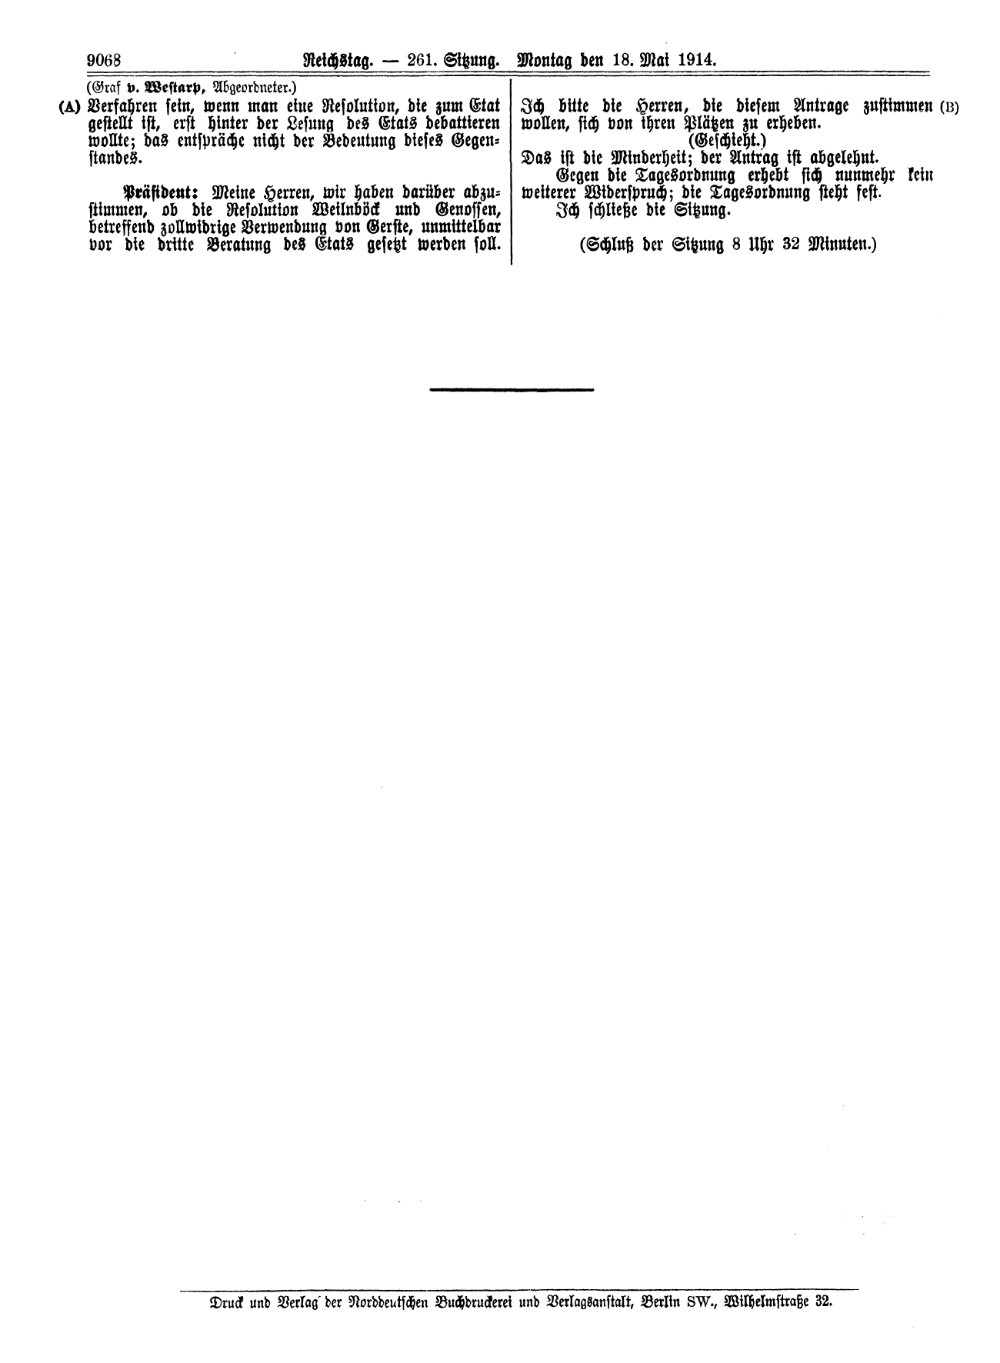 Scan of page 9068